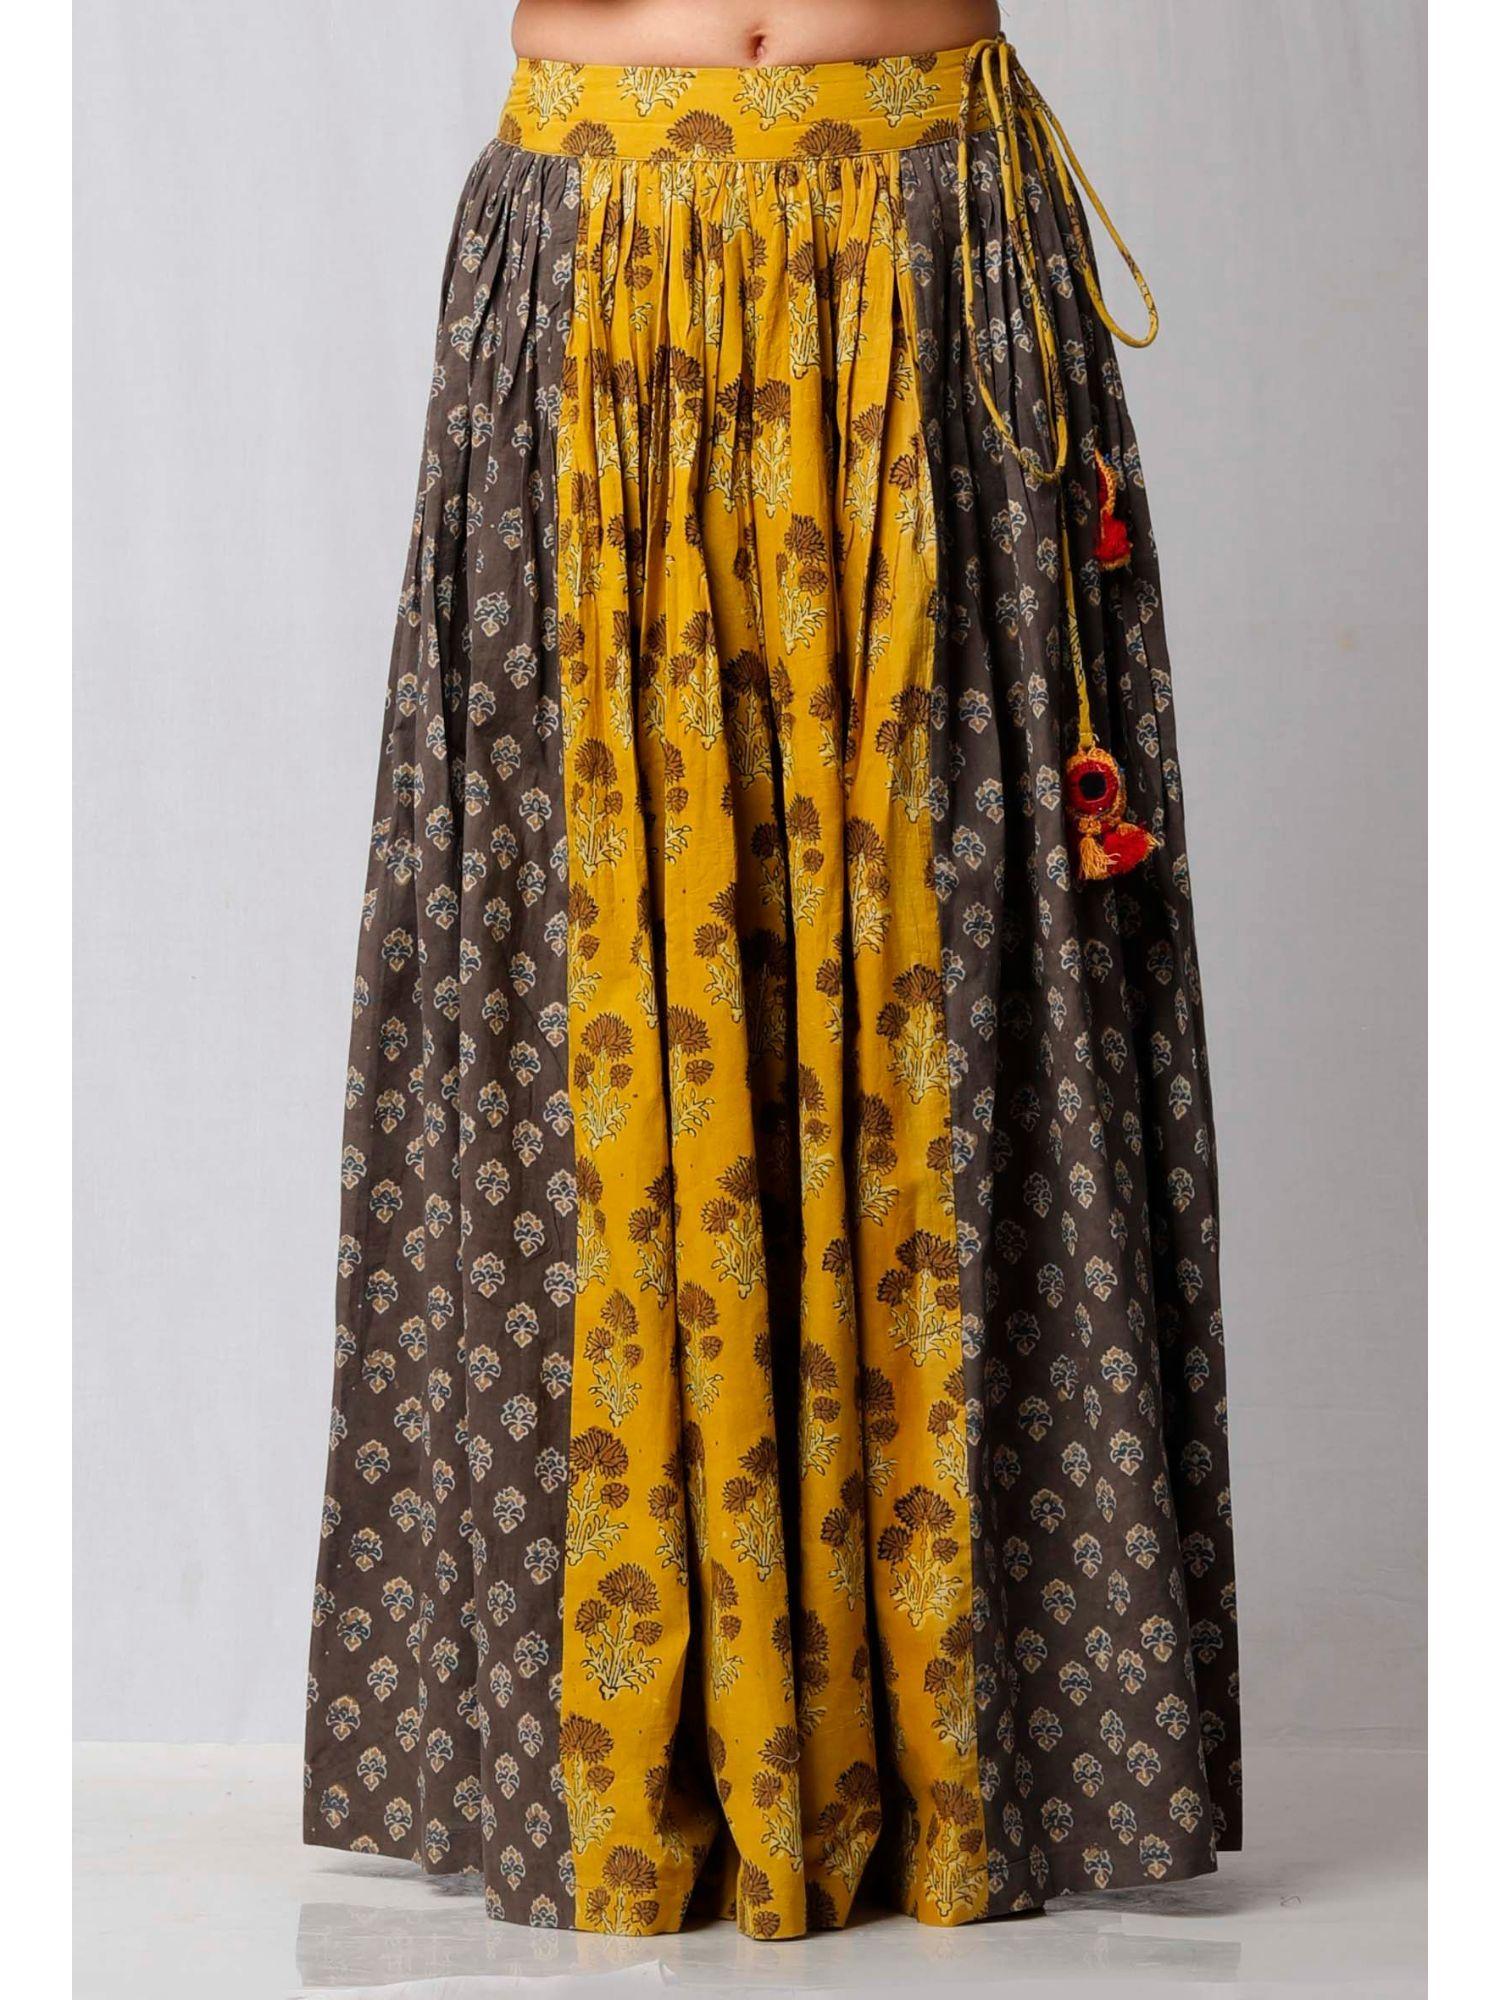 yellow and brown ajrakh printed skirt